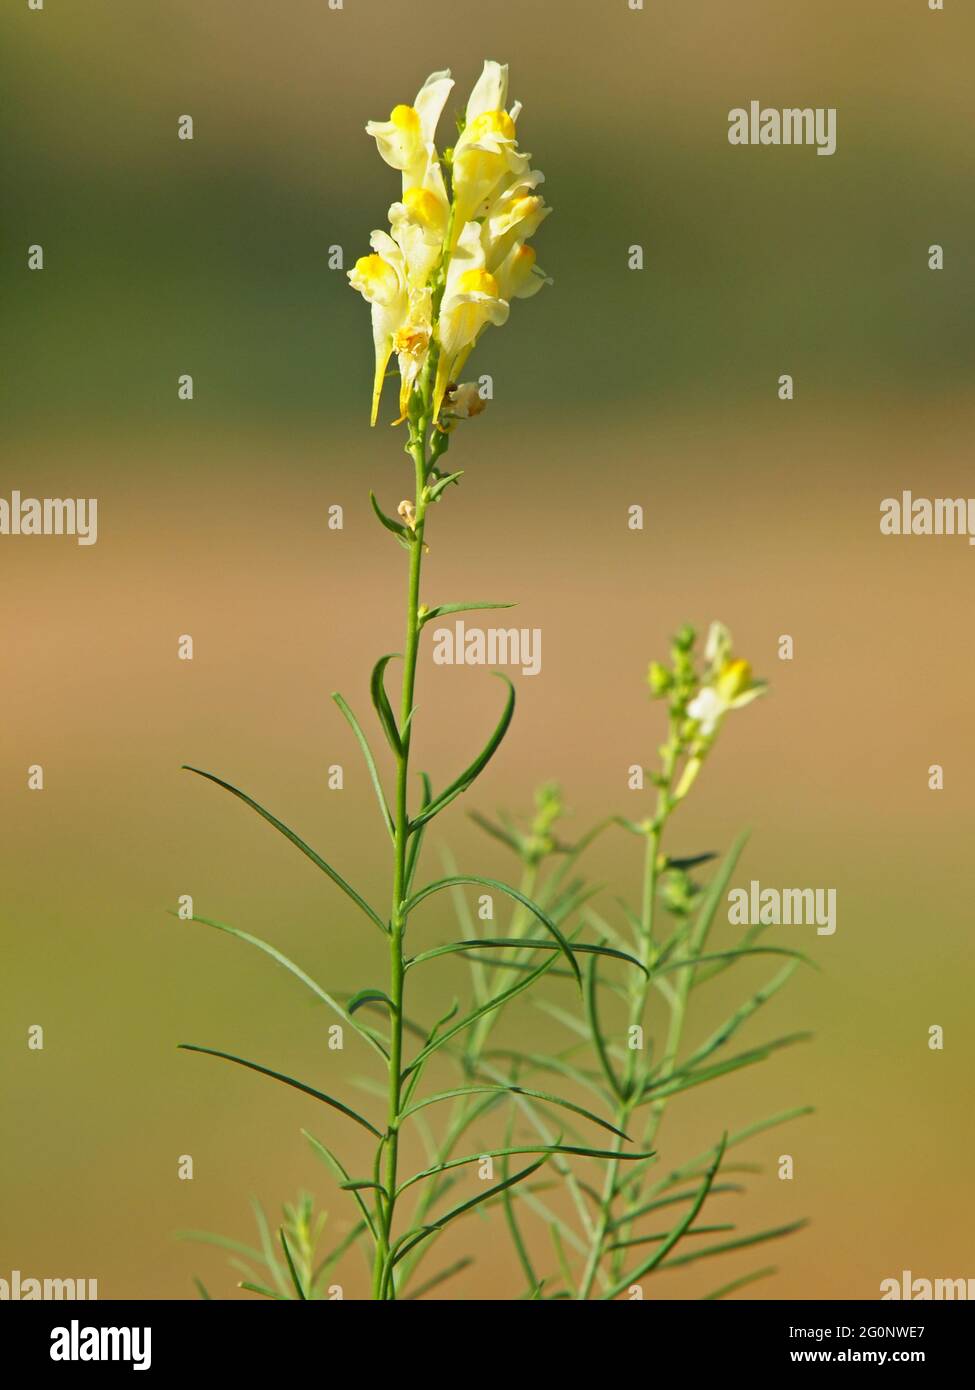 Yellow flower of toadflax or butter-and-eggs, Linaria vulgaris Stock Photo